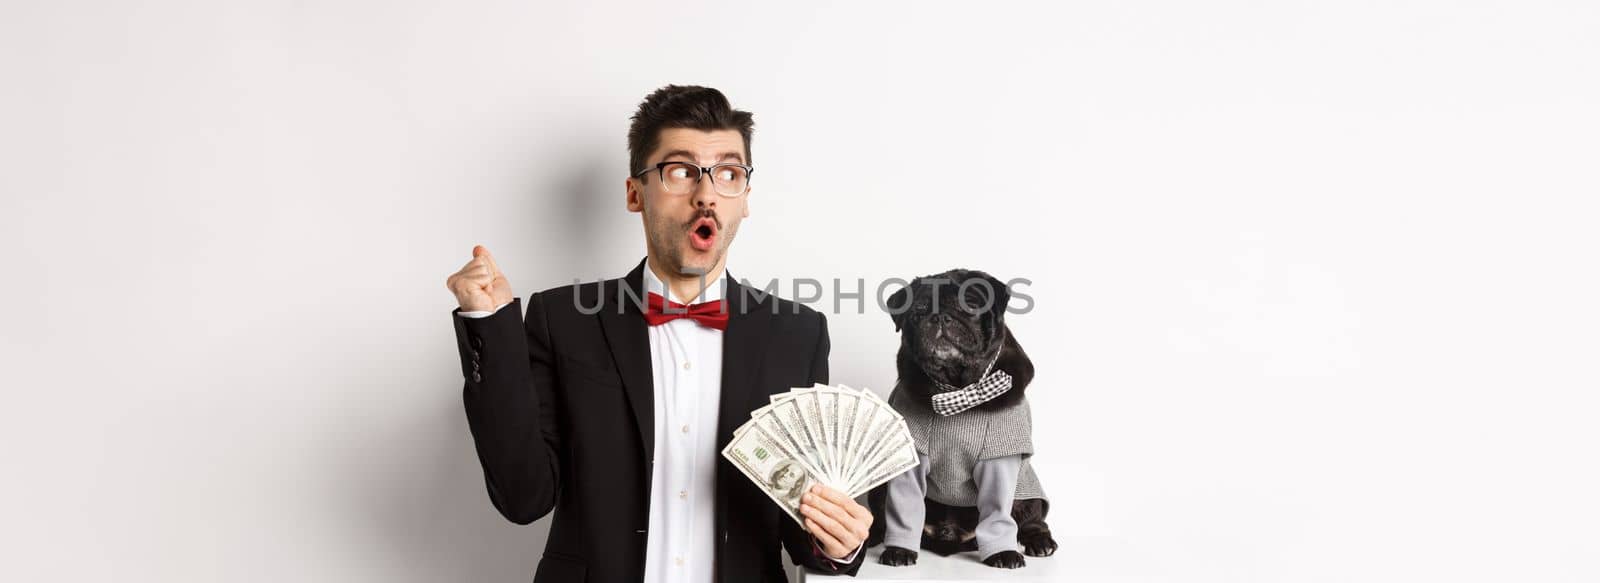 Happy young man in suit earn money with his dog. Guy rejoicing, holding dollars and staring left, black pug in costume staring at camera, white background.